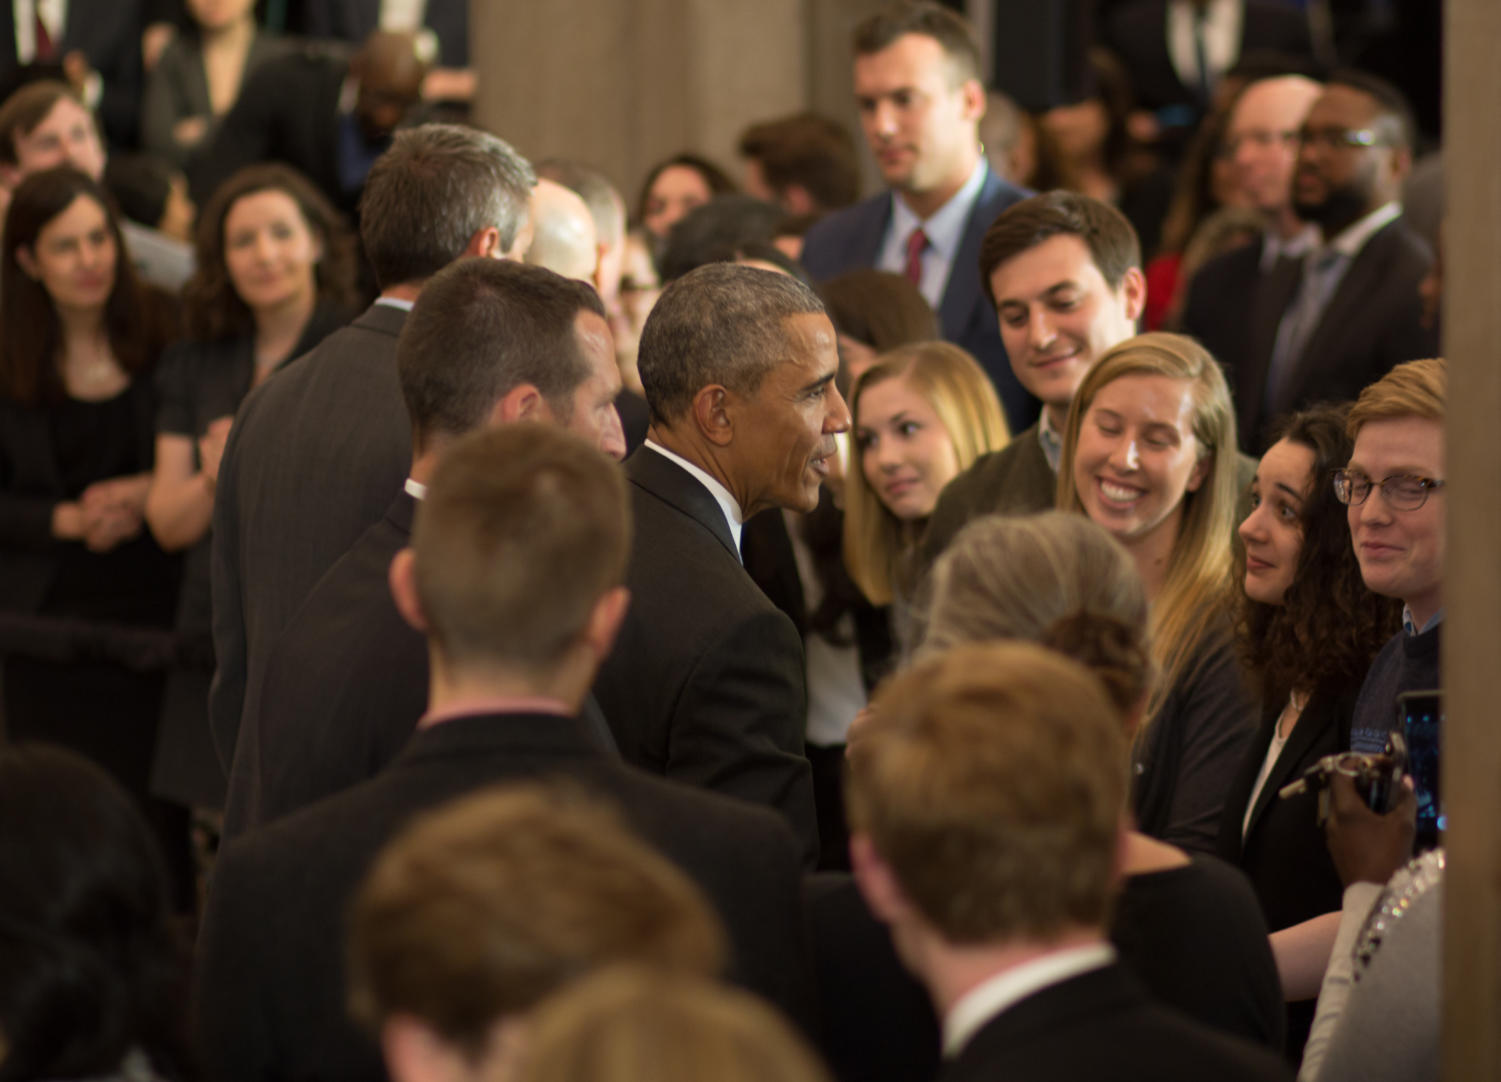 After the event, Obama shook hands with University of Chicago Law School students in the crowd. 